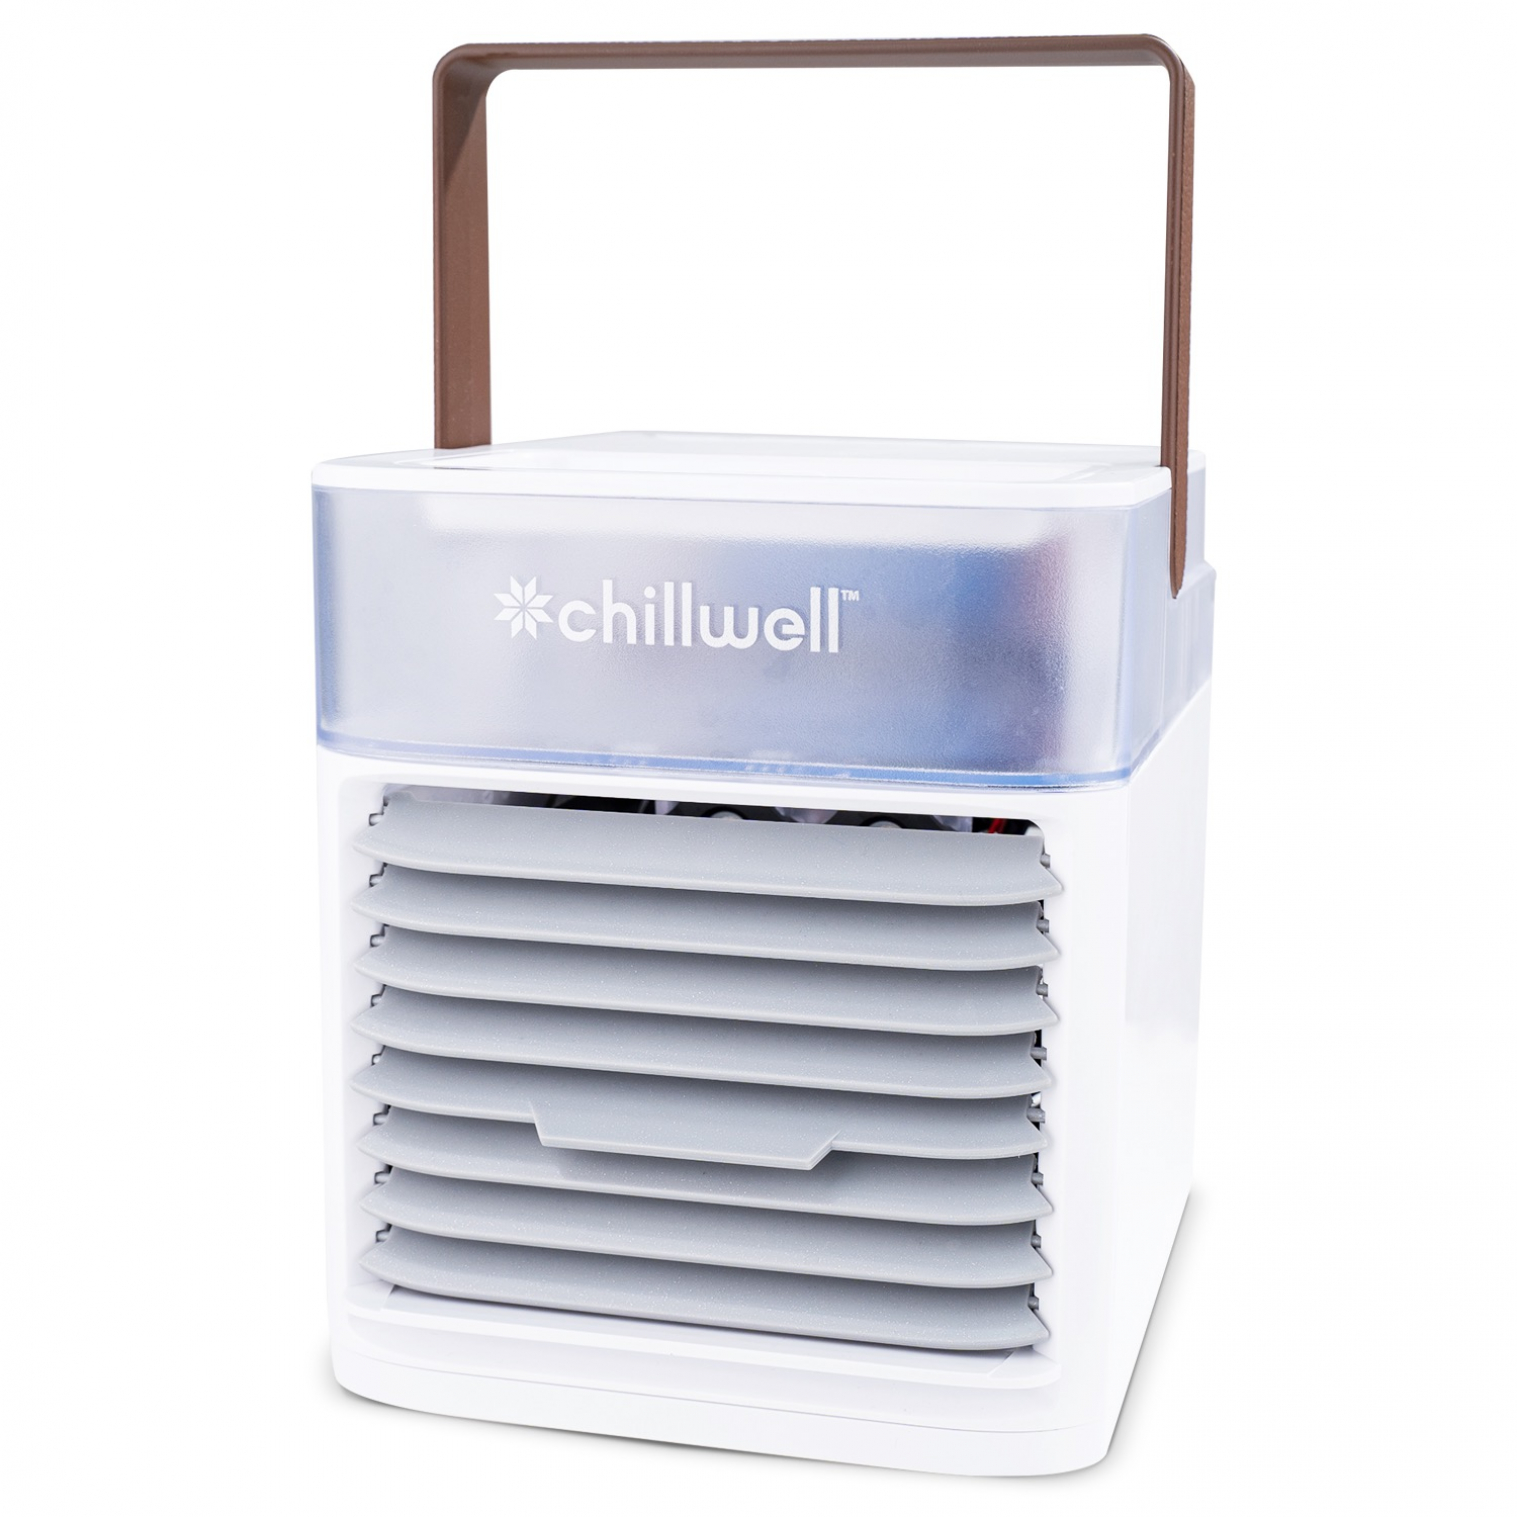 Chillwell AC Portable Air Cooler